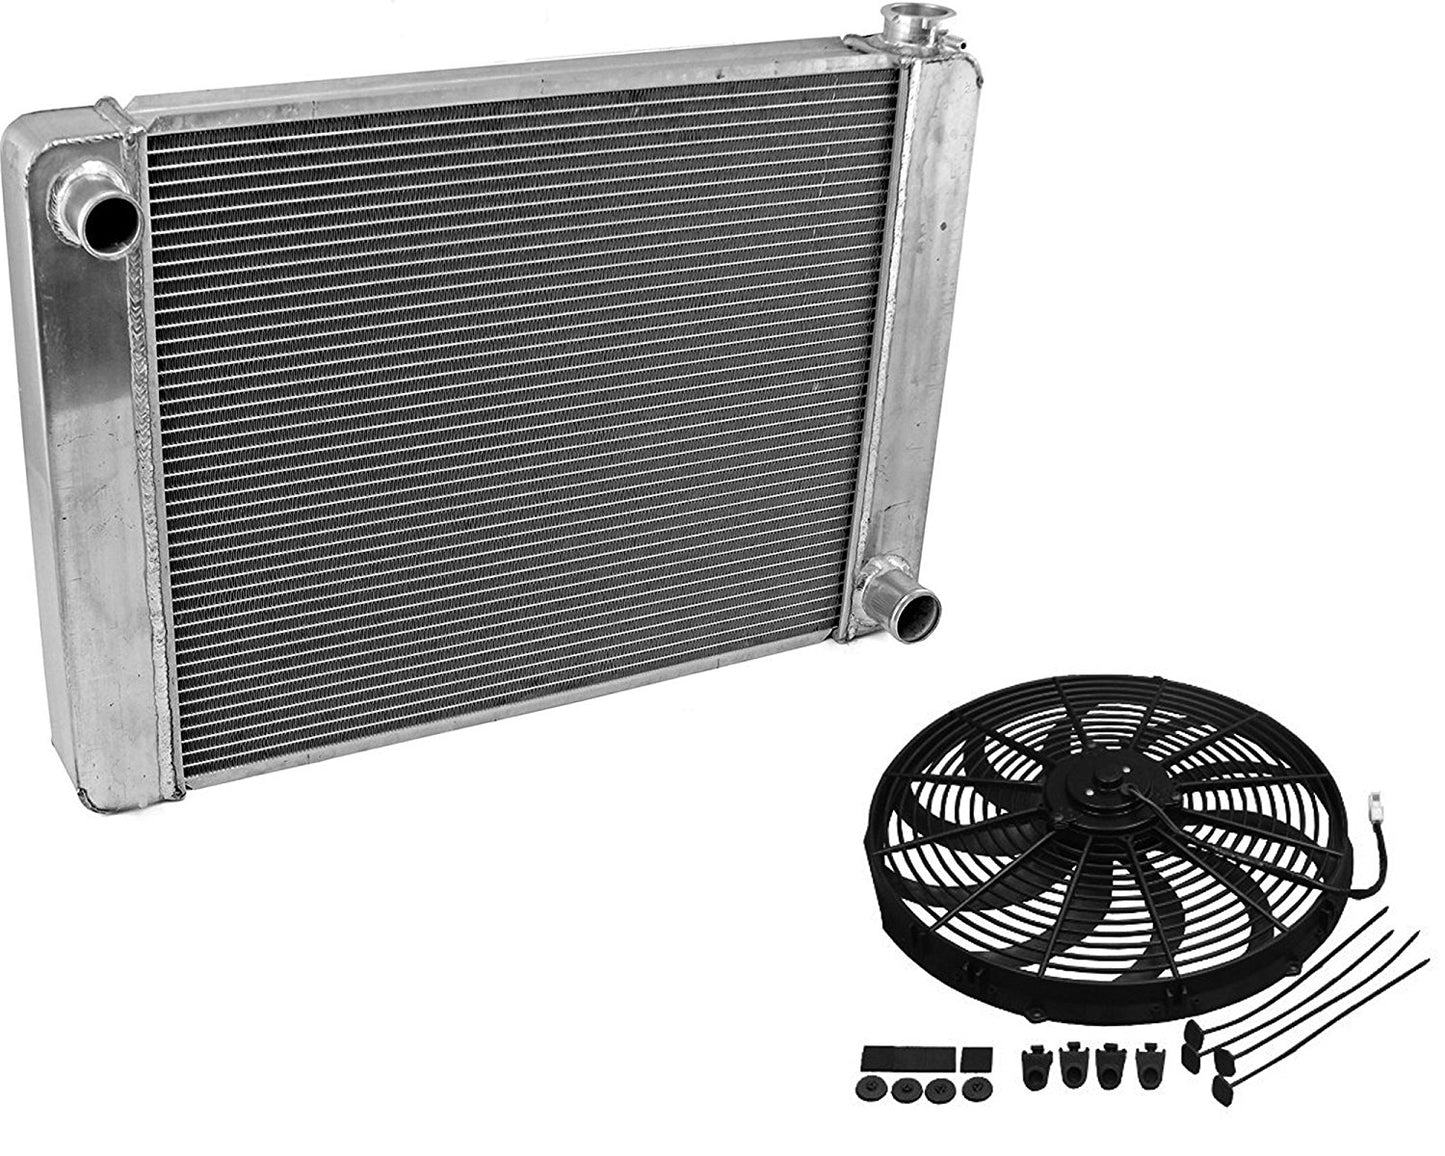 For SBC BBC Chevy GM Fabricated Aluminum Radiator 21" x 19" x3" &Heavy Duty 16" Cooling Fan